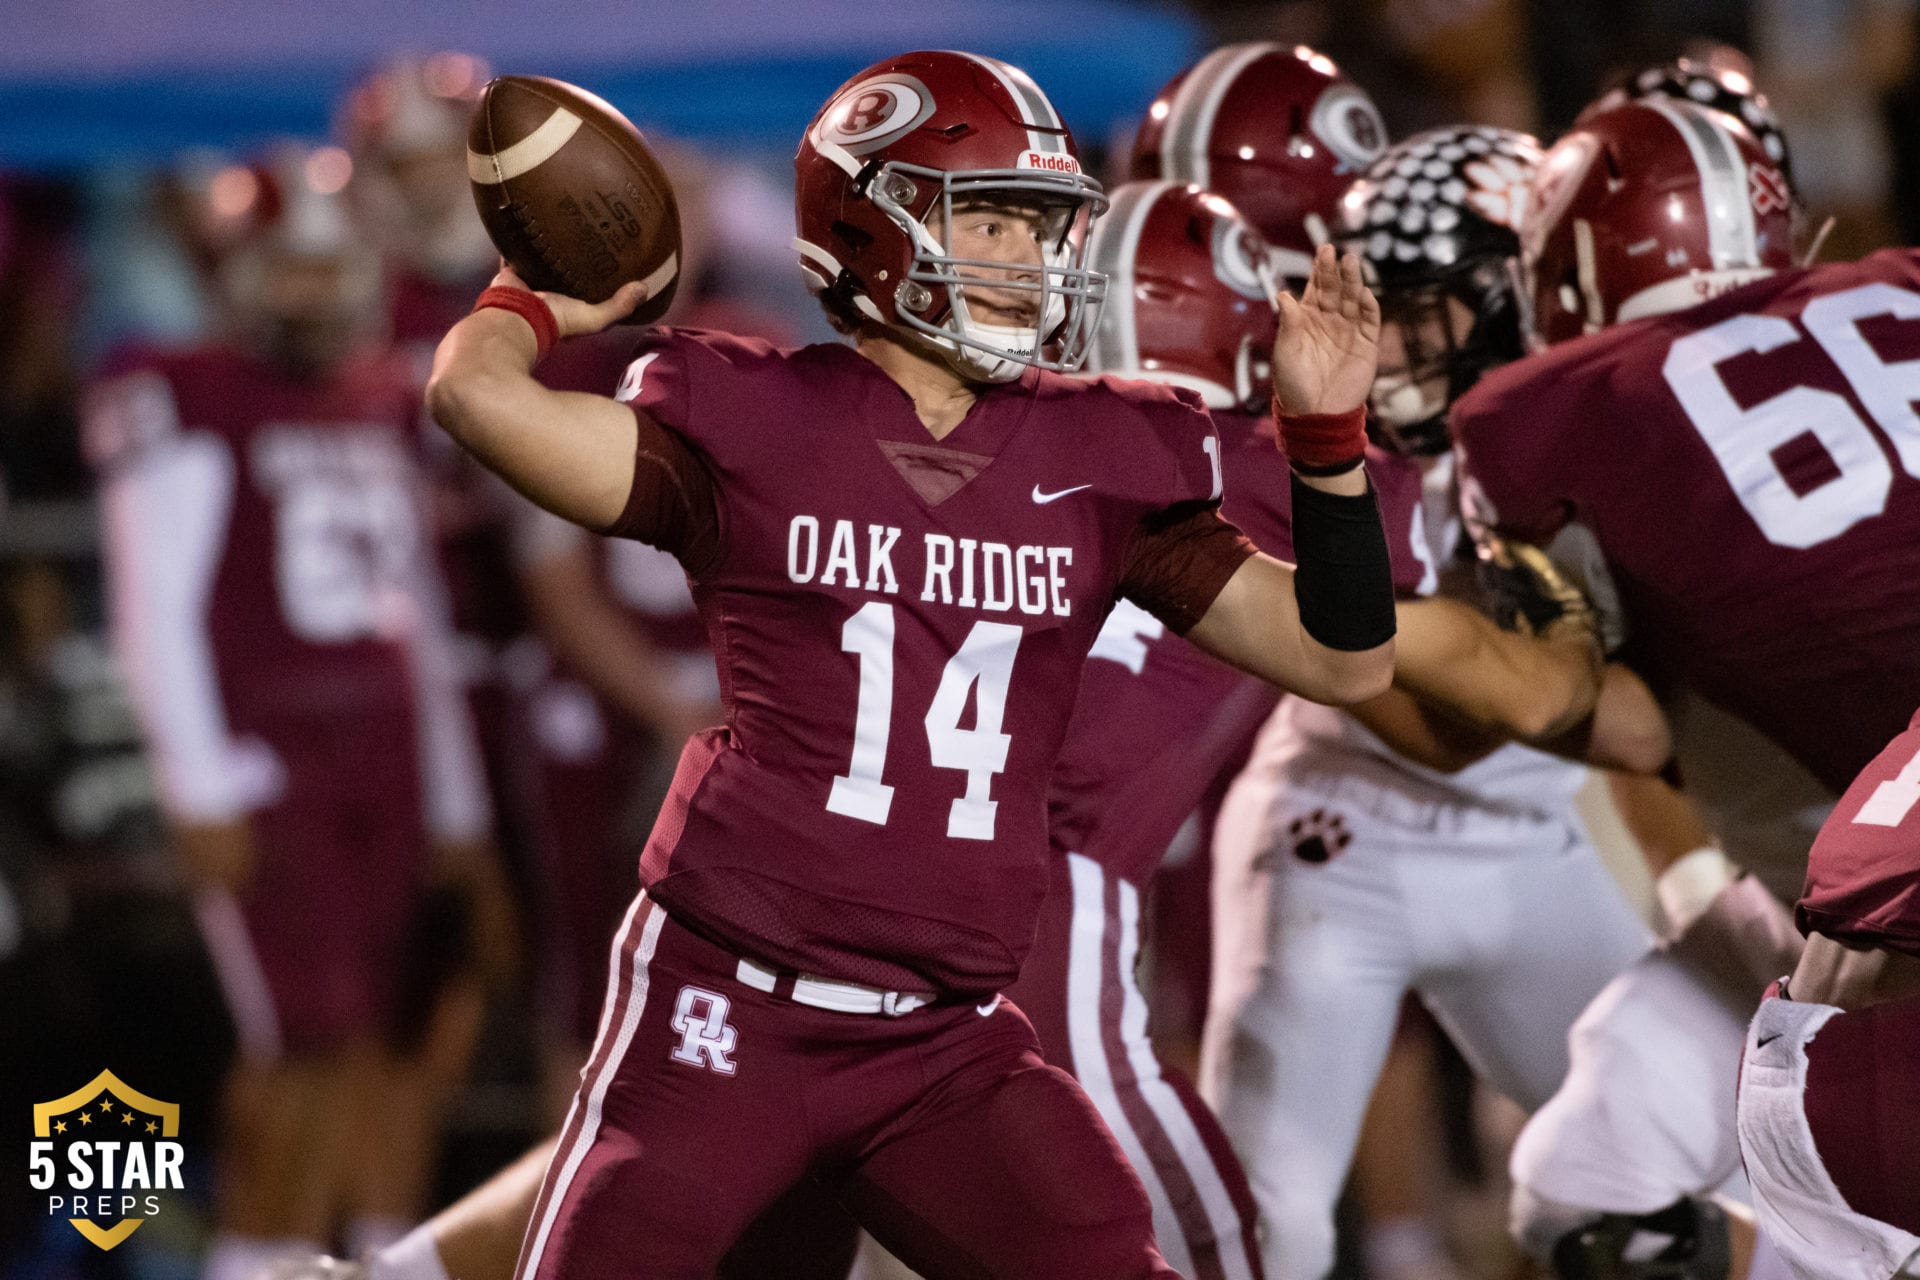 Oak Ridge football survives secondhalf rally by Powell; claims 2seed for 5A playoffs Five